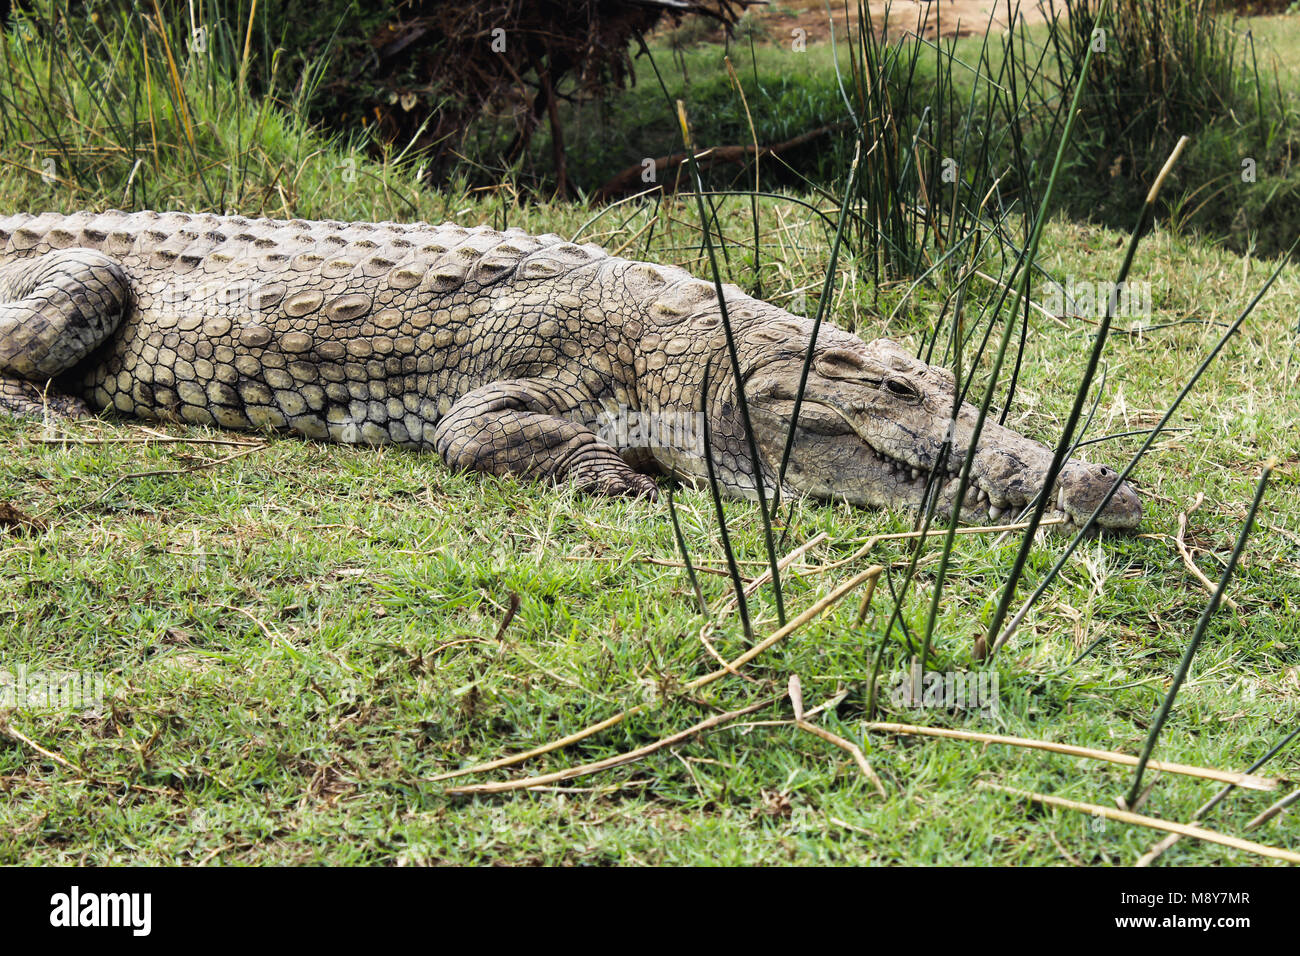 A crocodile waiting on the shore in the Tsavo National Park in Kenya, Africa Stock Photo